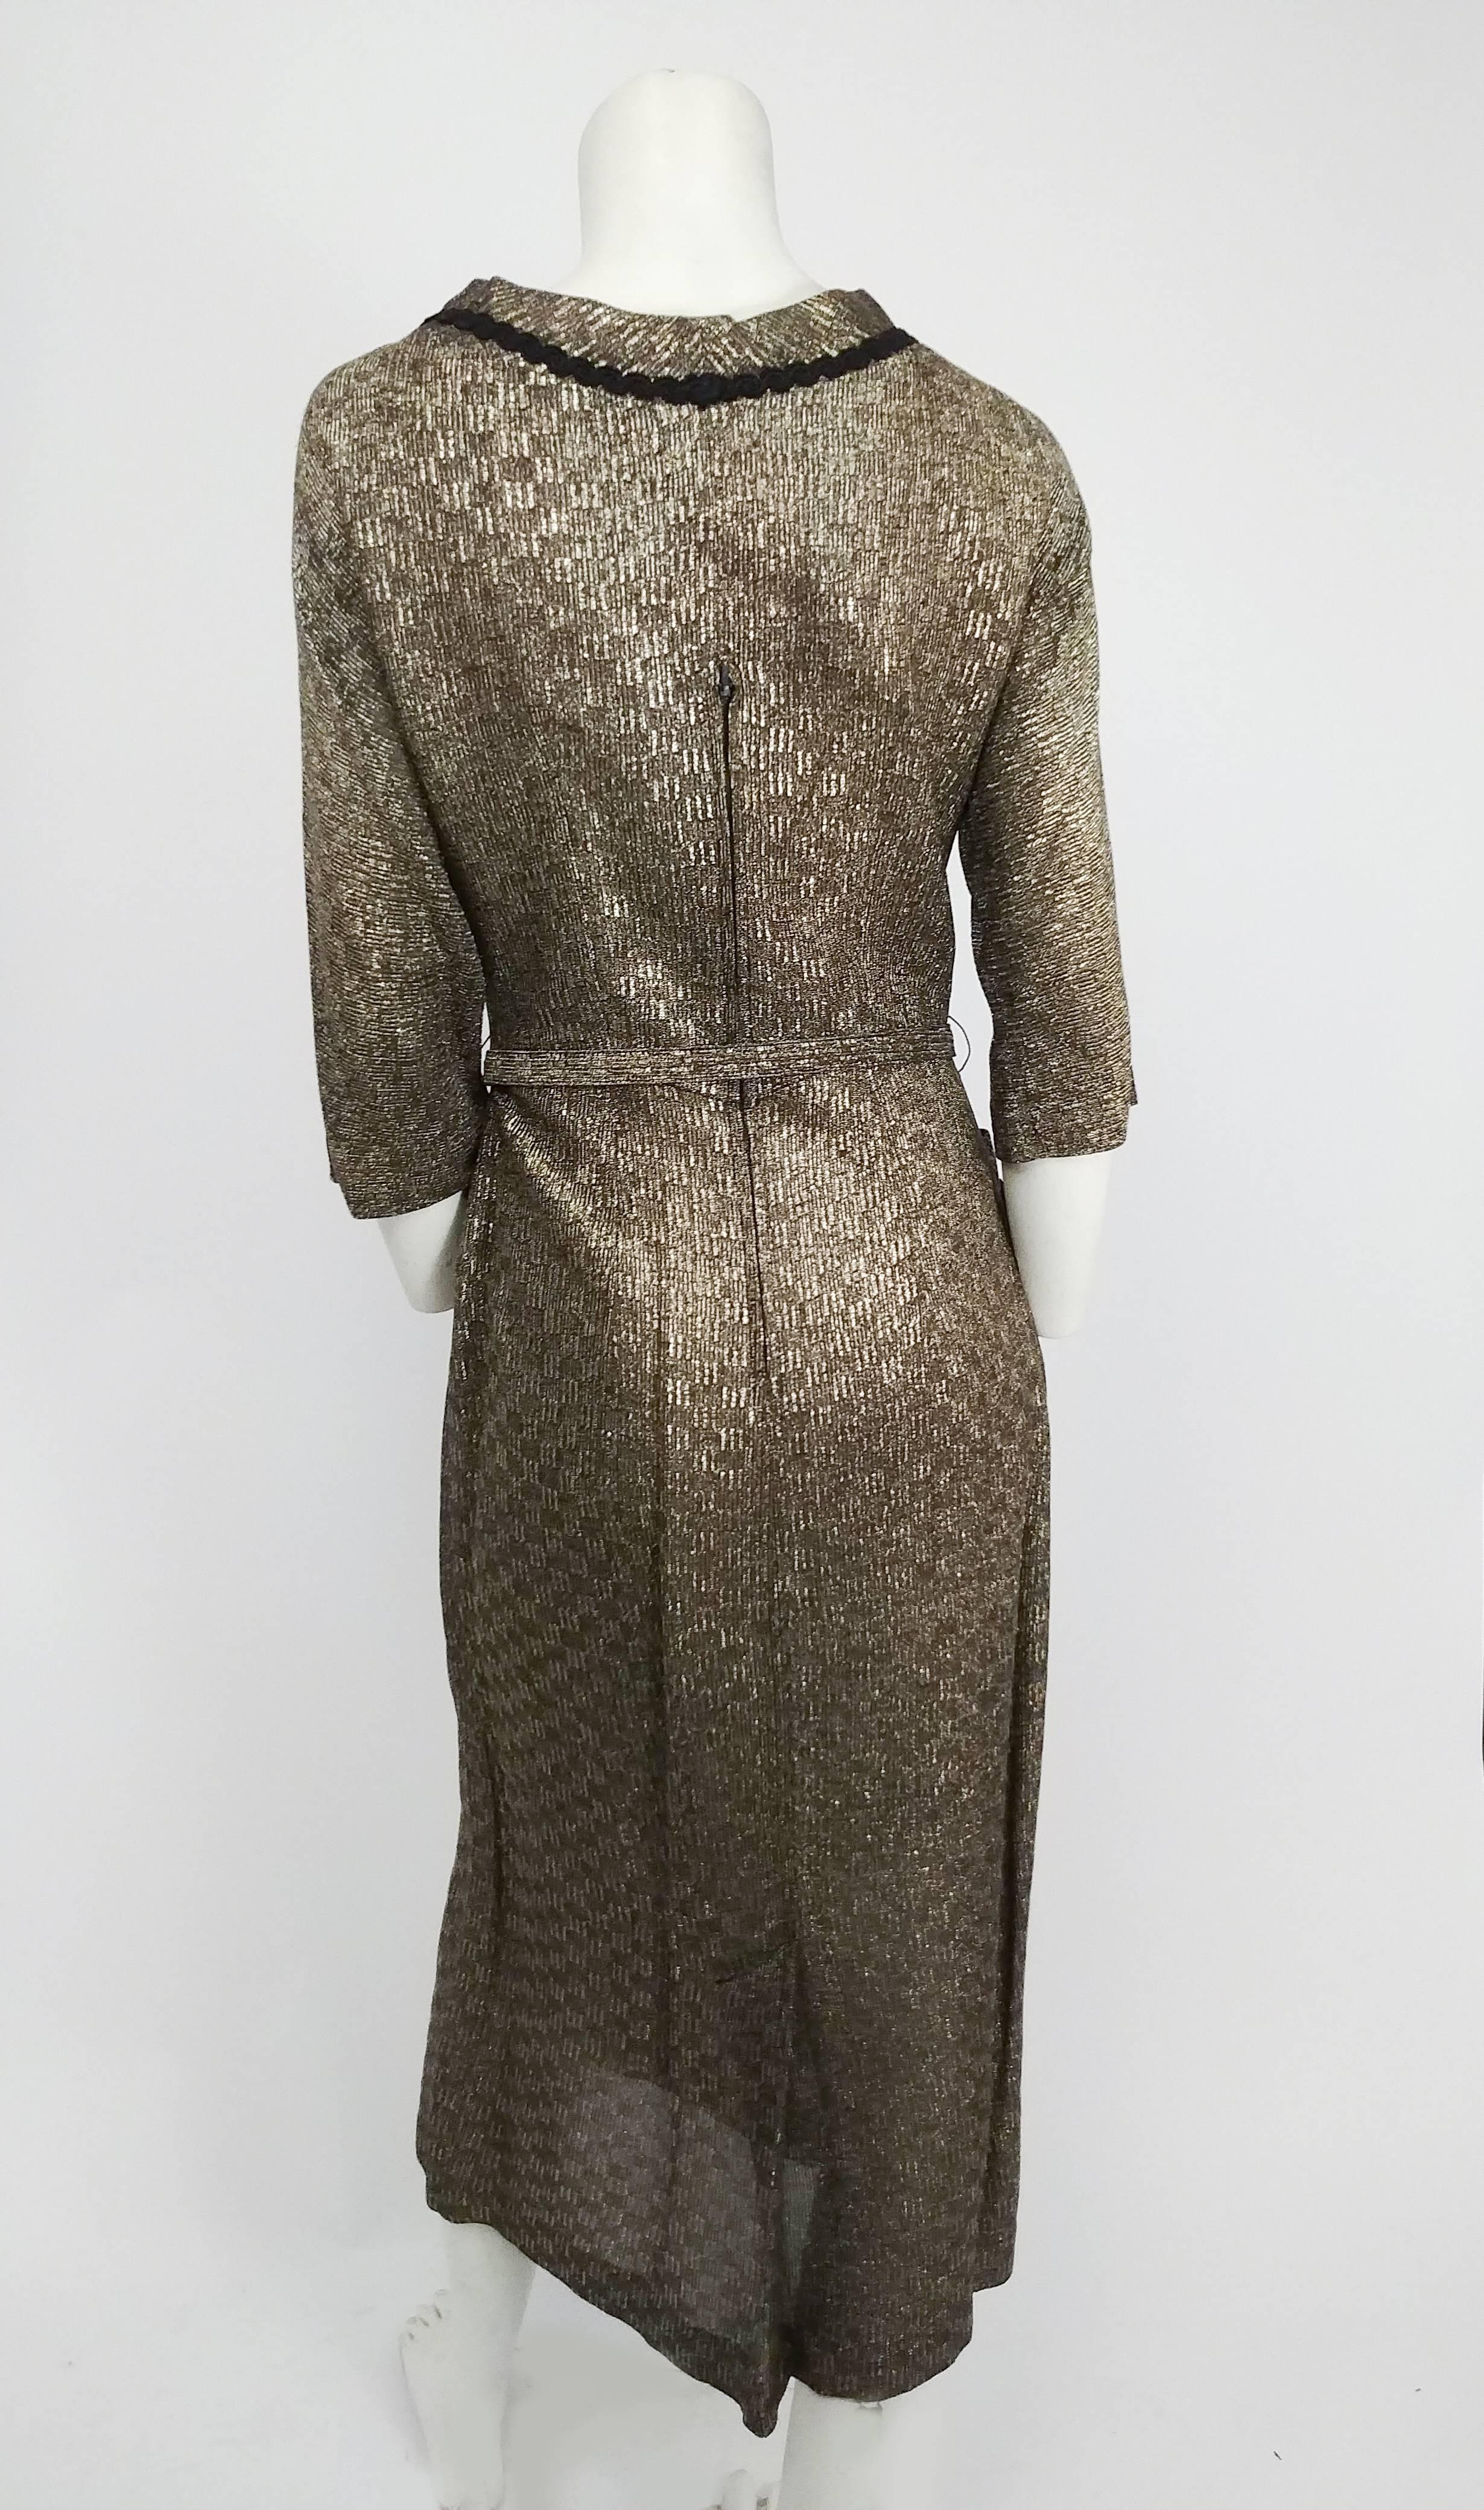 1940s Gold Lamé Dress. Black braid trim on collar and hips and adorable tassel detail on boat neck collar. Zips up mid back. Glove length sleeves. Original belt included. 